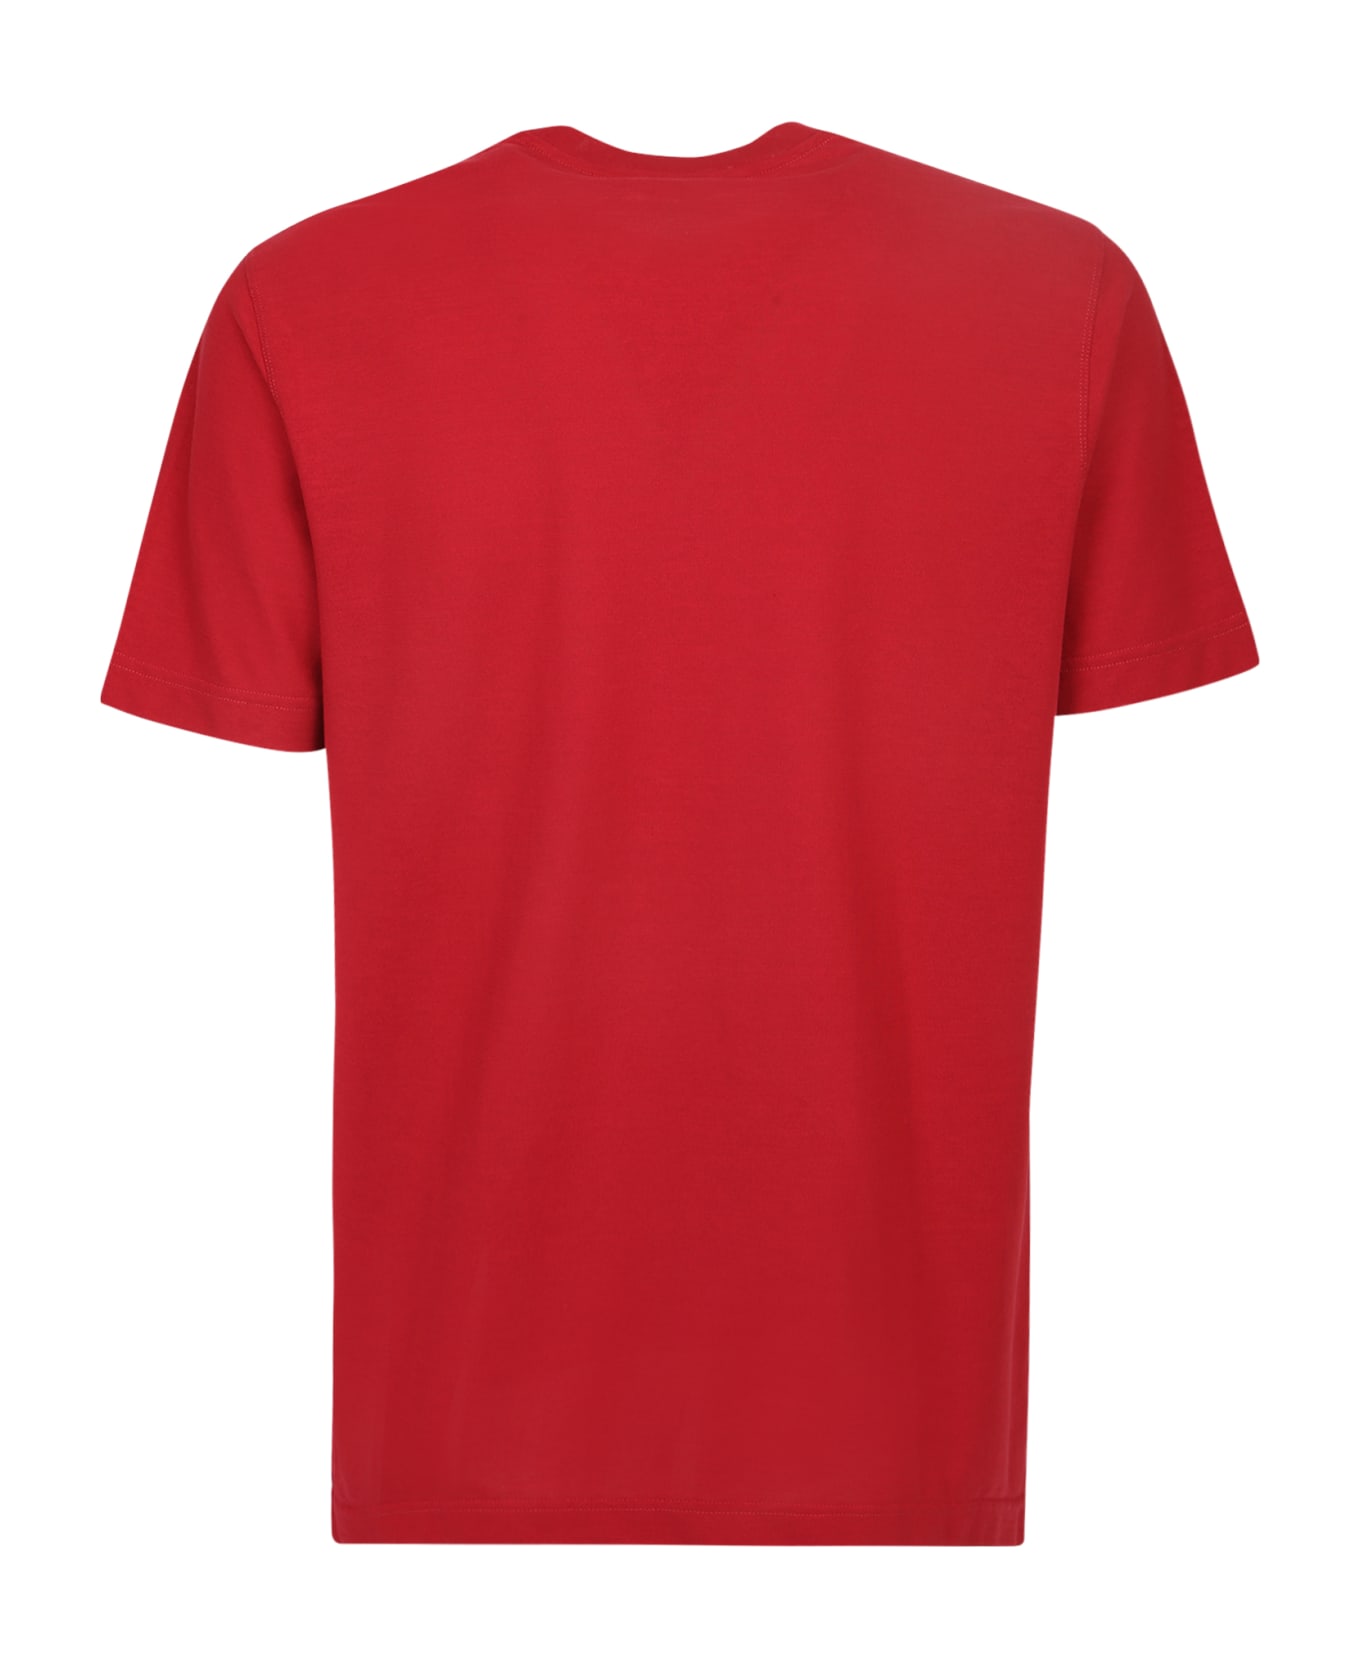 Zanone Patch T-shirt - Red